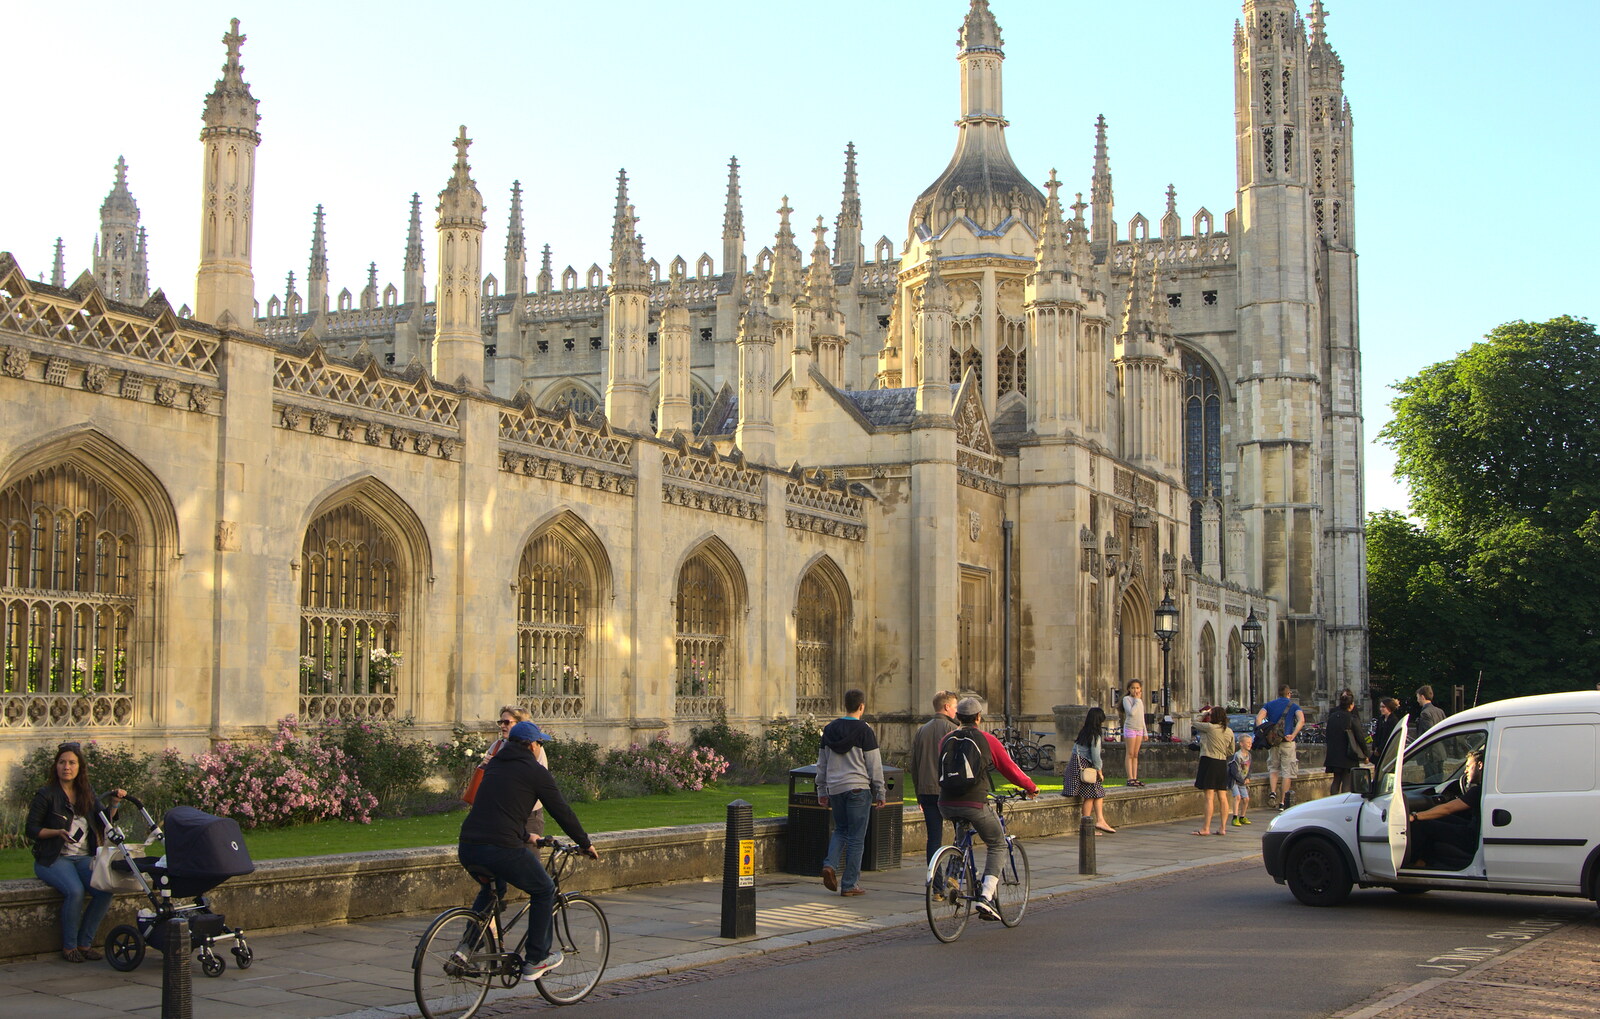 Back in the 'Bridge: an Anniversary, Cambridge - 3rd July 2016: King's College